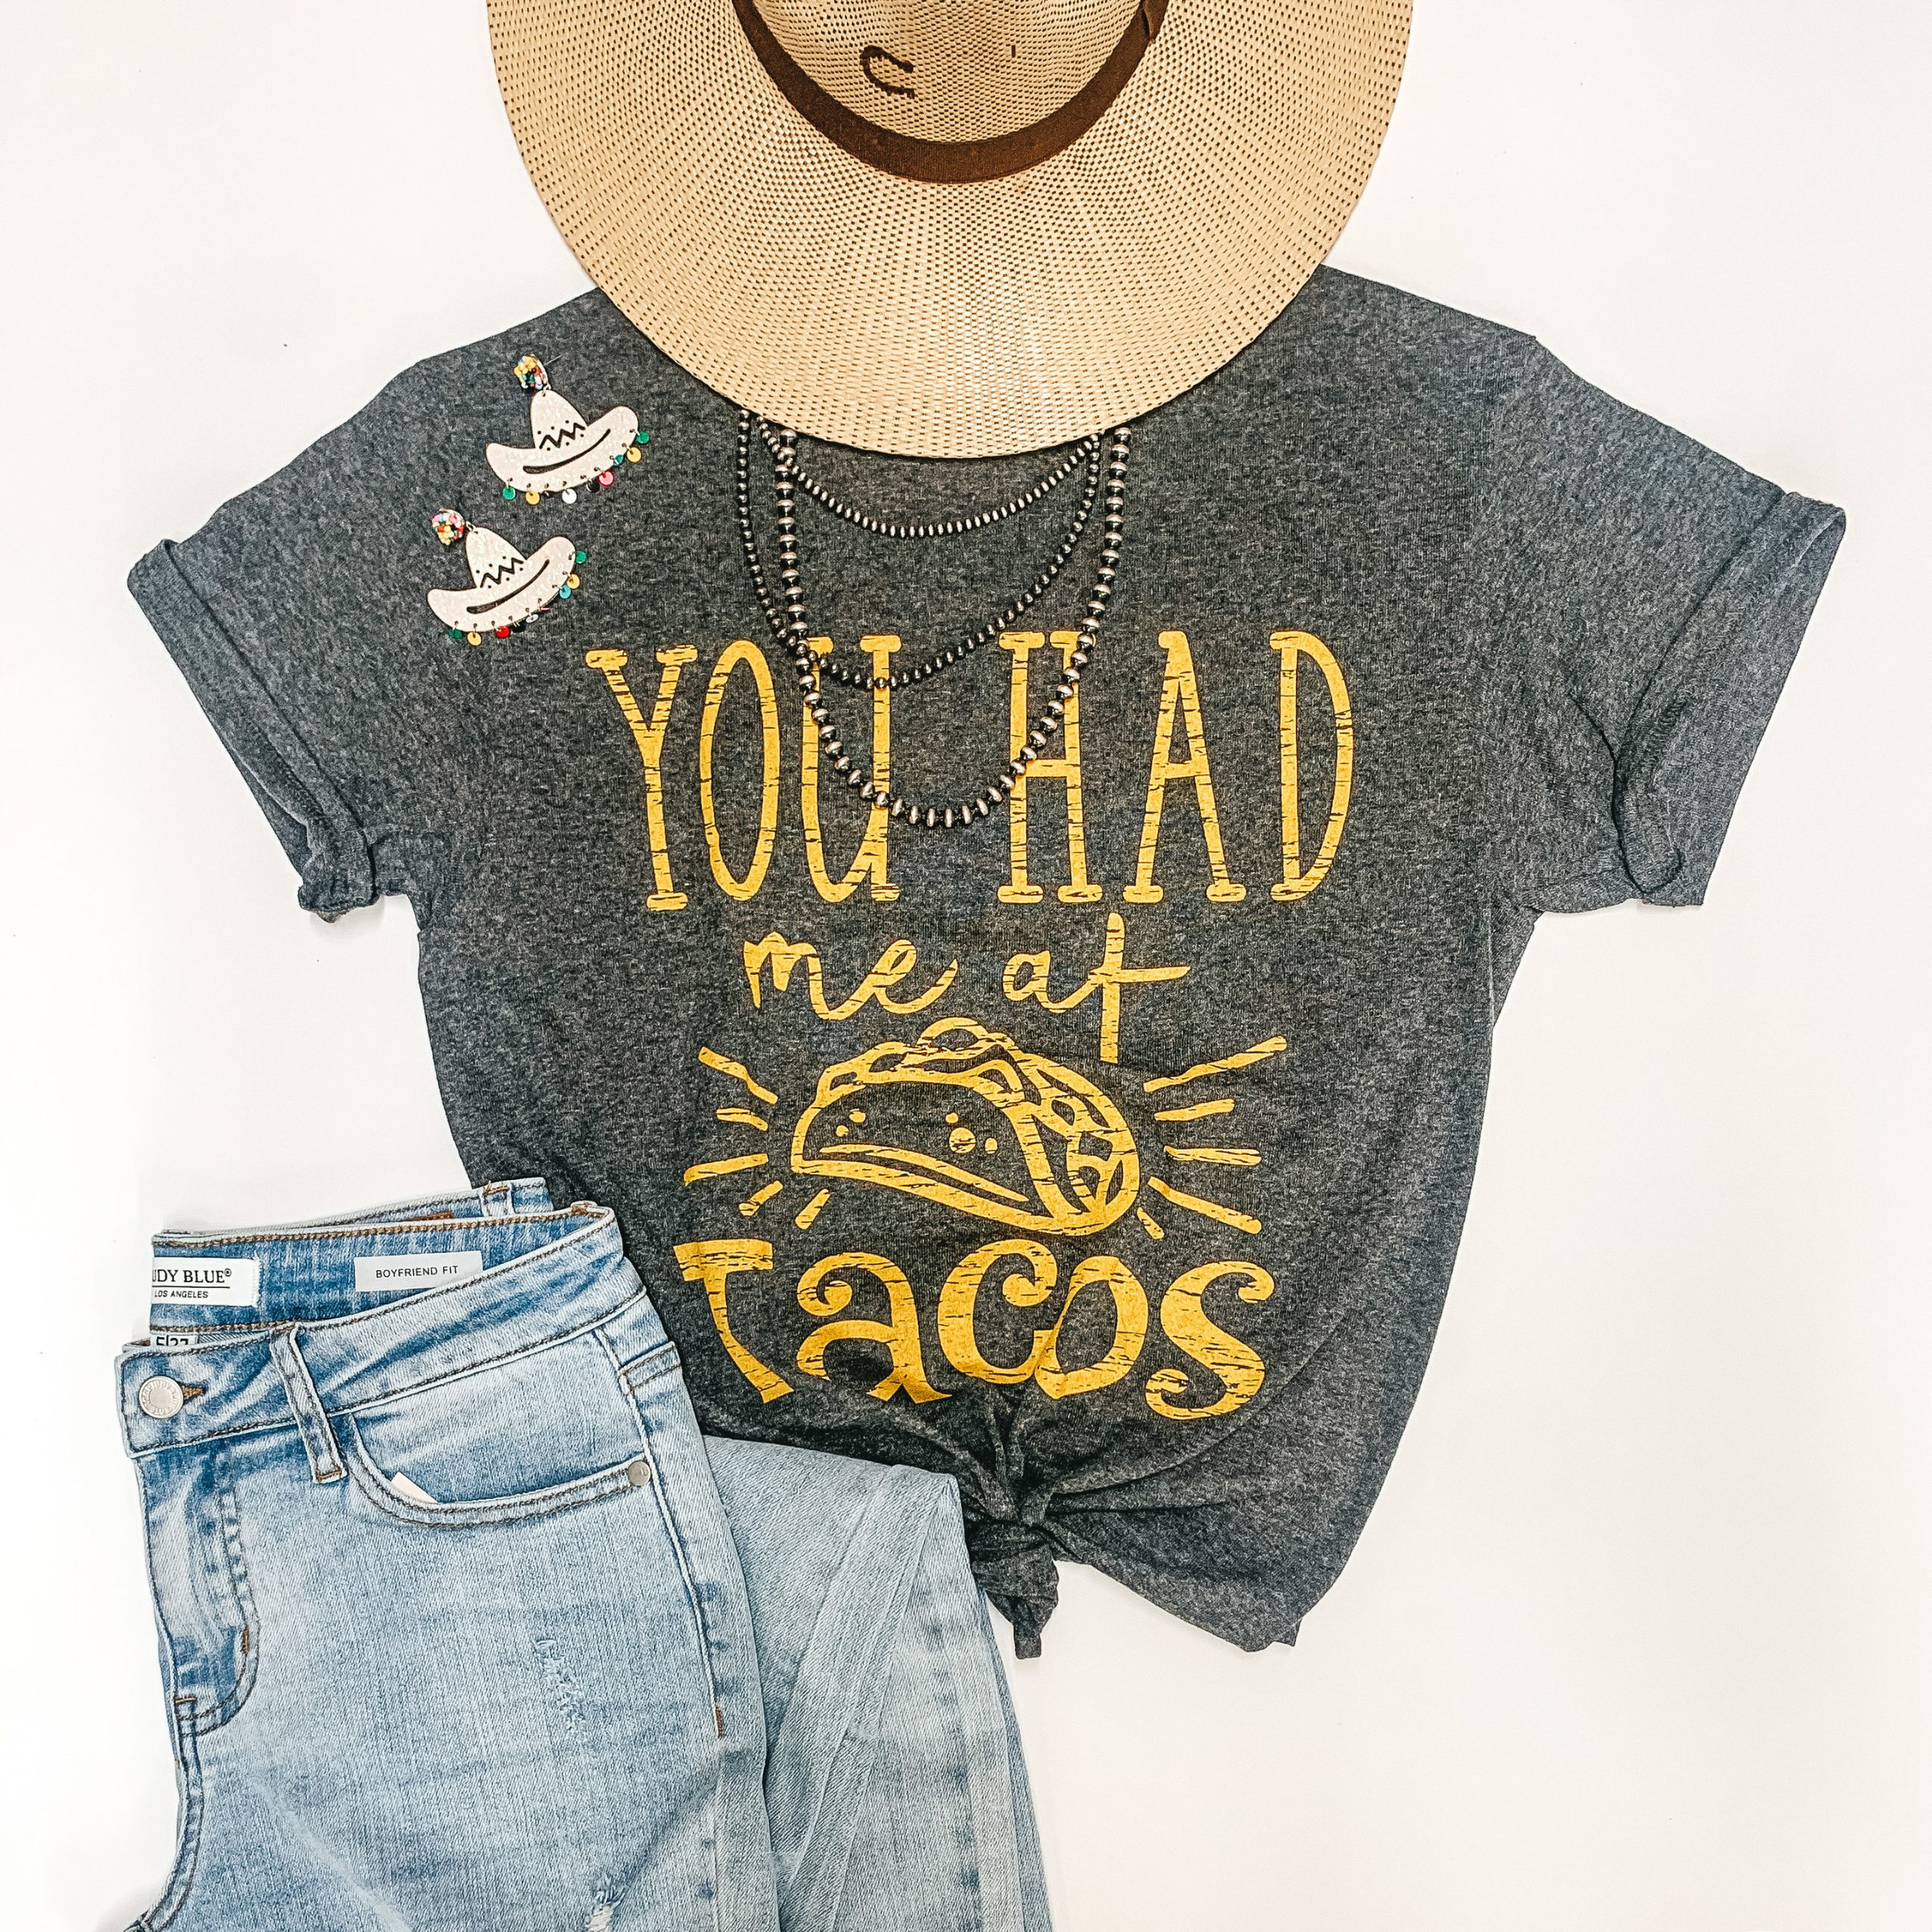 You Had Me at Tacos Short Sleeve Graphic Tee in Charcoal Grey - Giddy Up Glamour Boutique